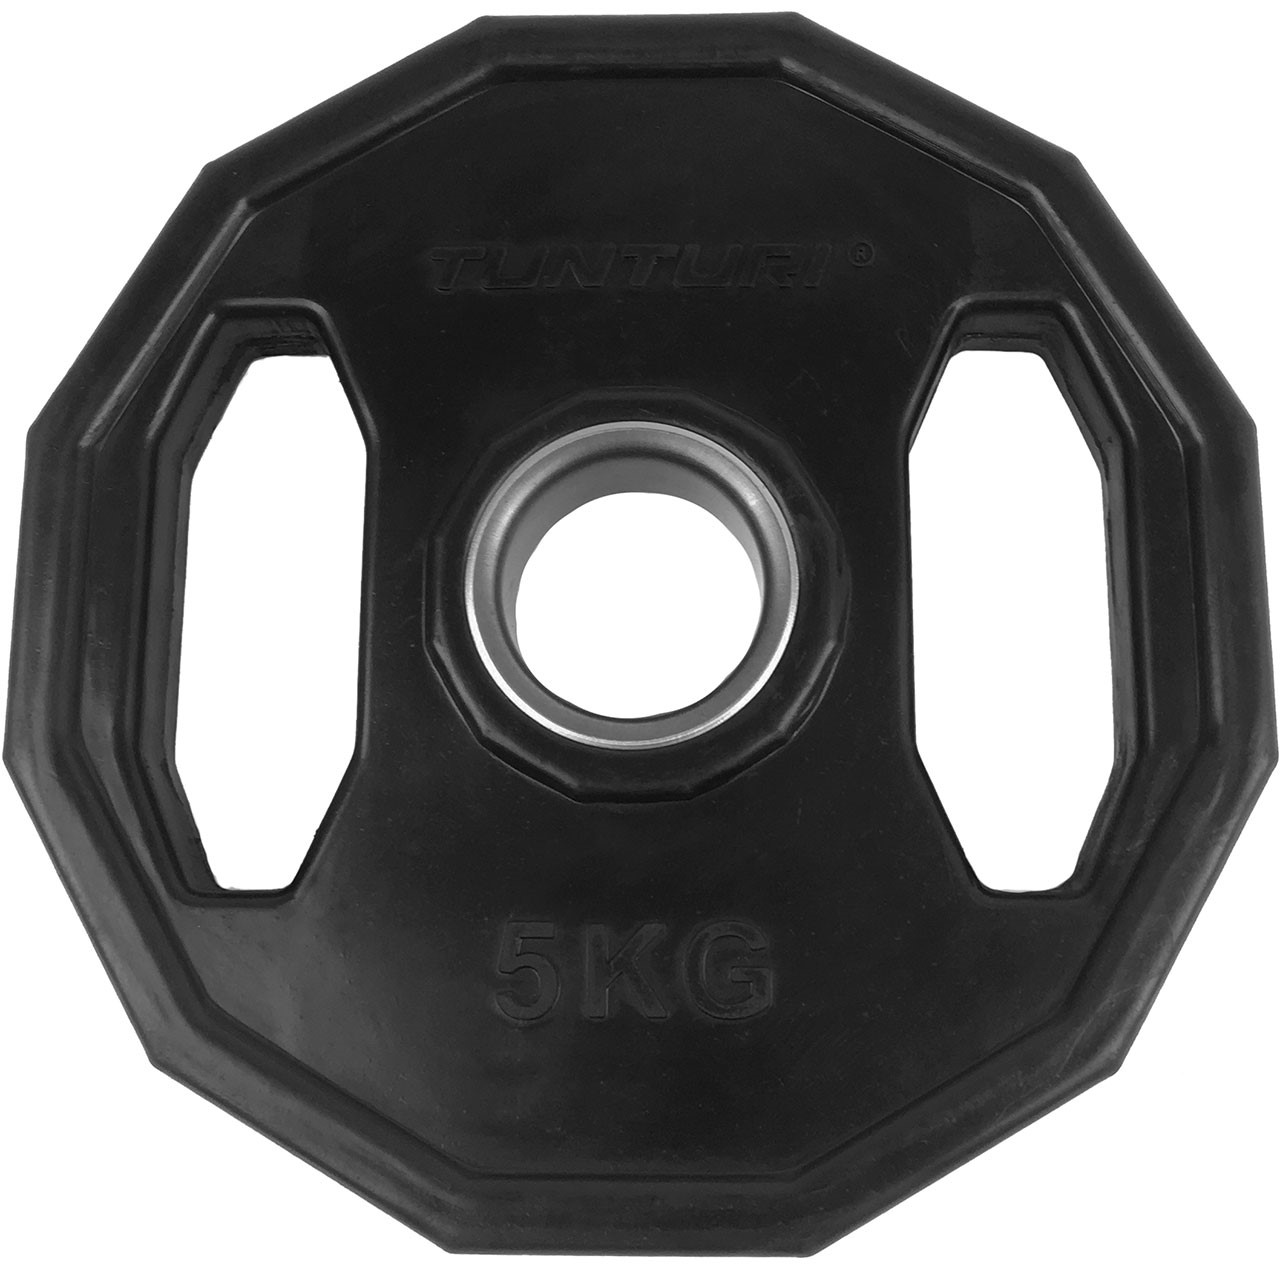 Rubber Covered 5 kg Tunturi Weight Plate 50 mm